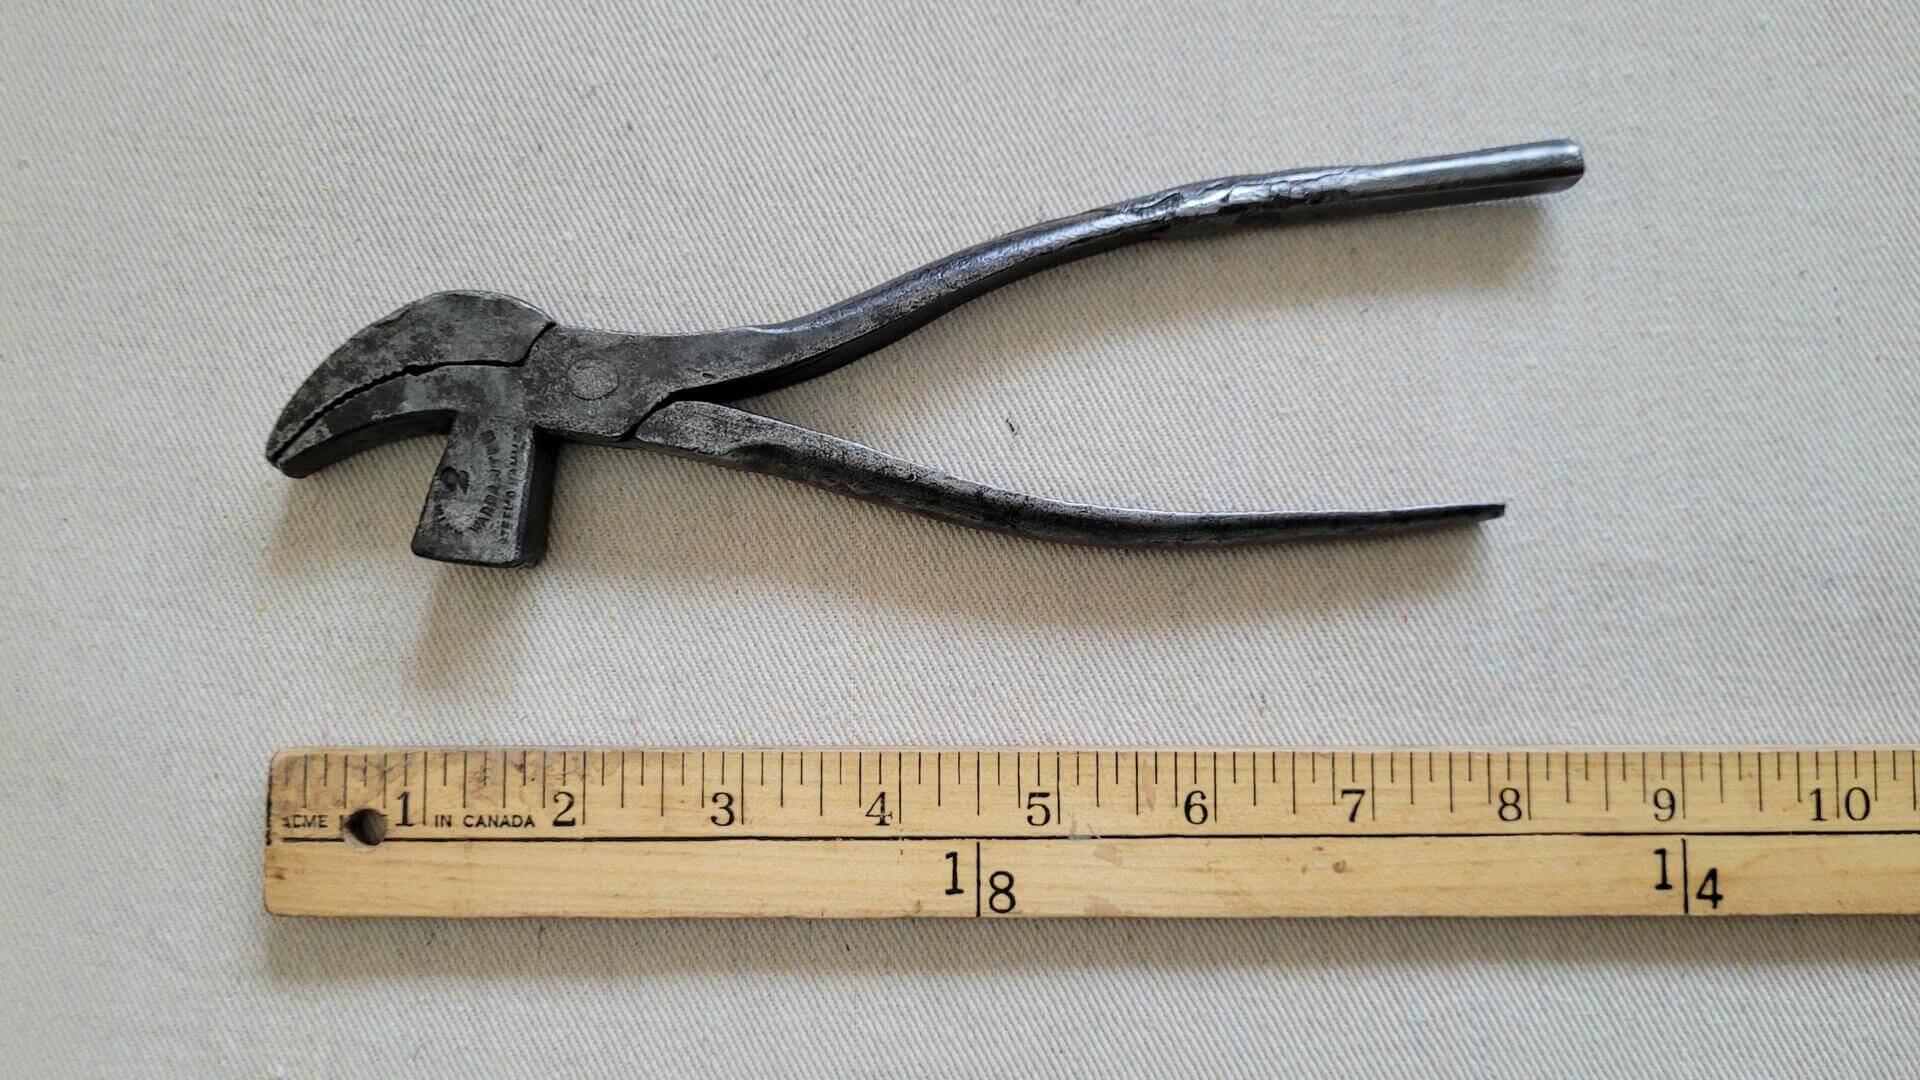 Vintage W&C Wynn leather lasting pincer pliers hammer tool 8 inches long. Antique made in England 19th century leather working and shoemaker collectible hand tool